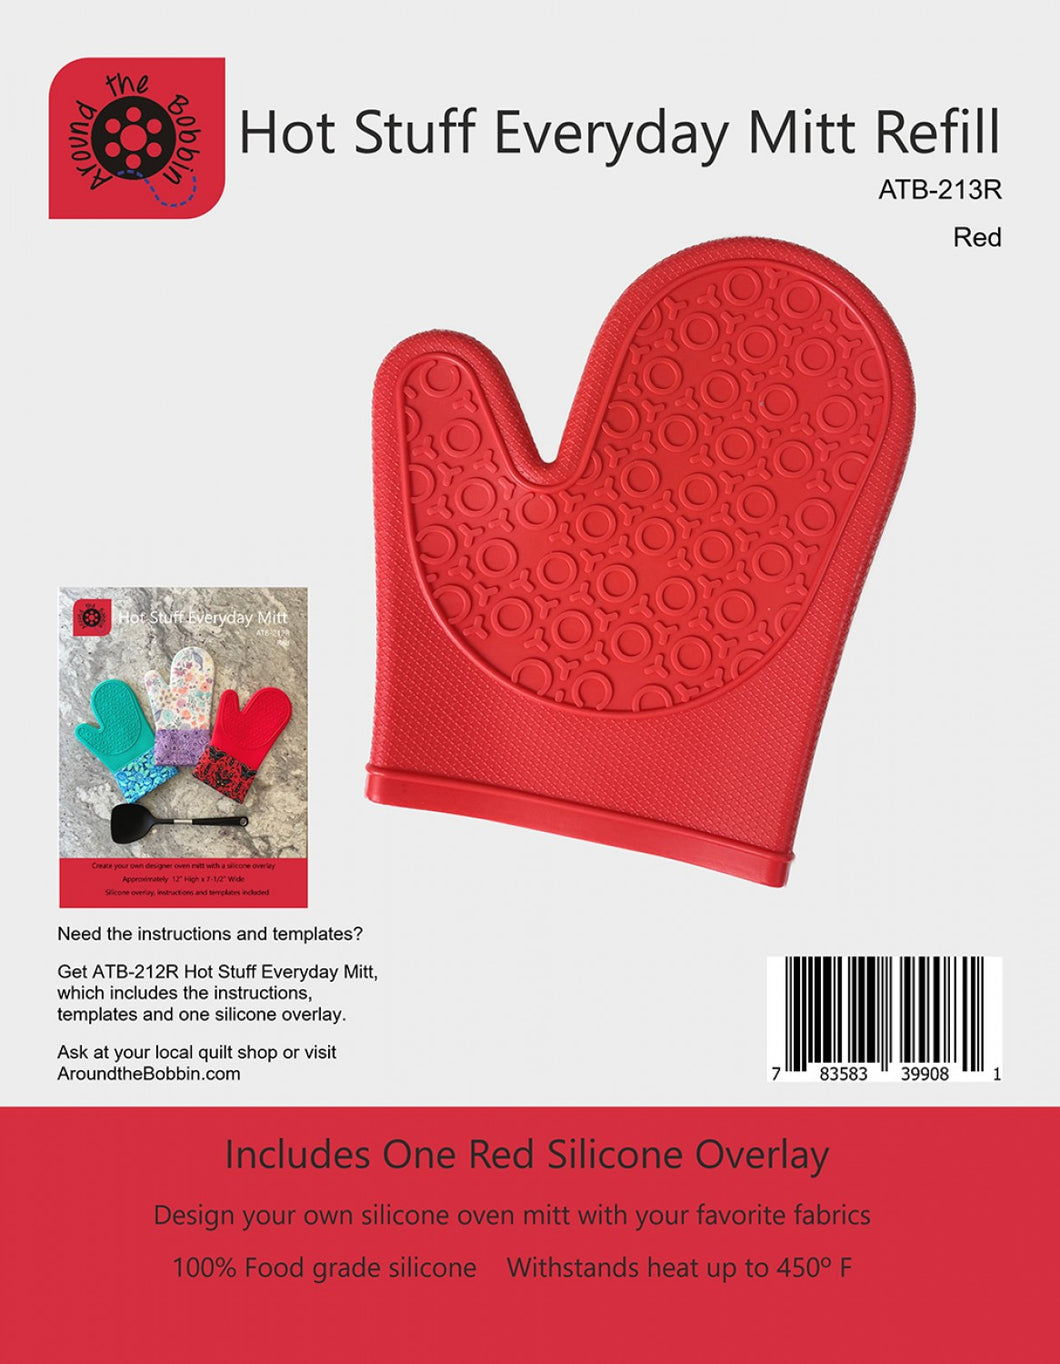 Hot Stuff oven mitt silicone overlay refill, or pattern including refill